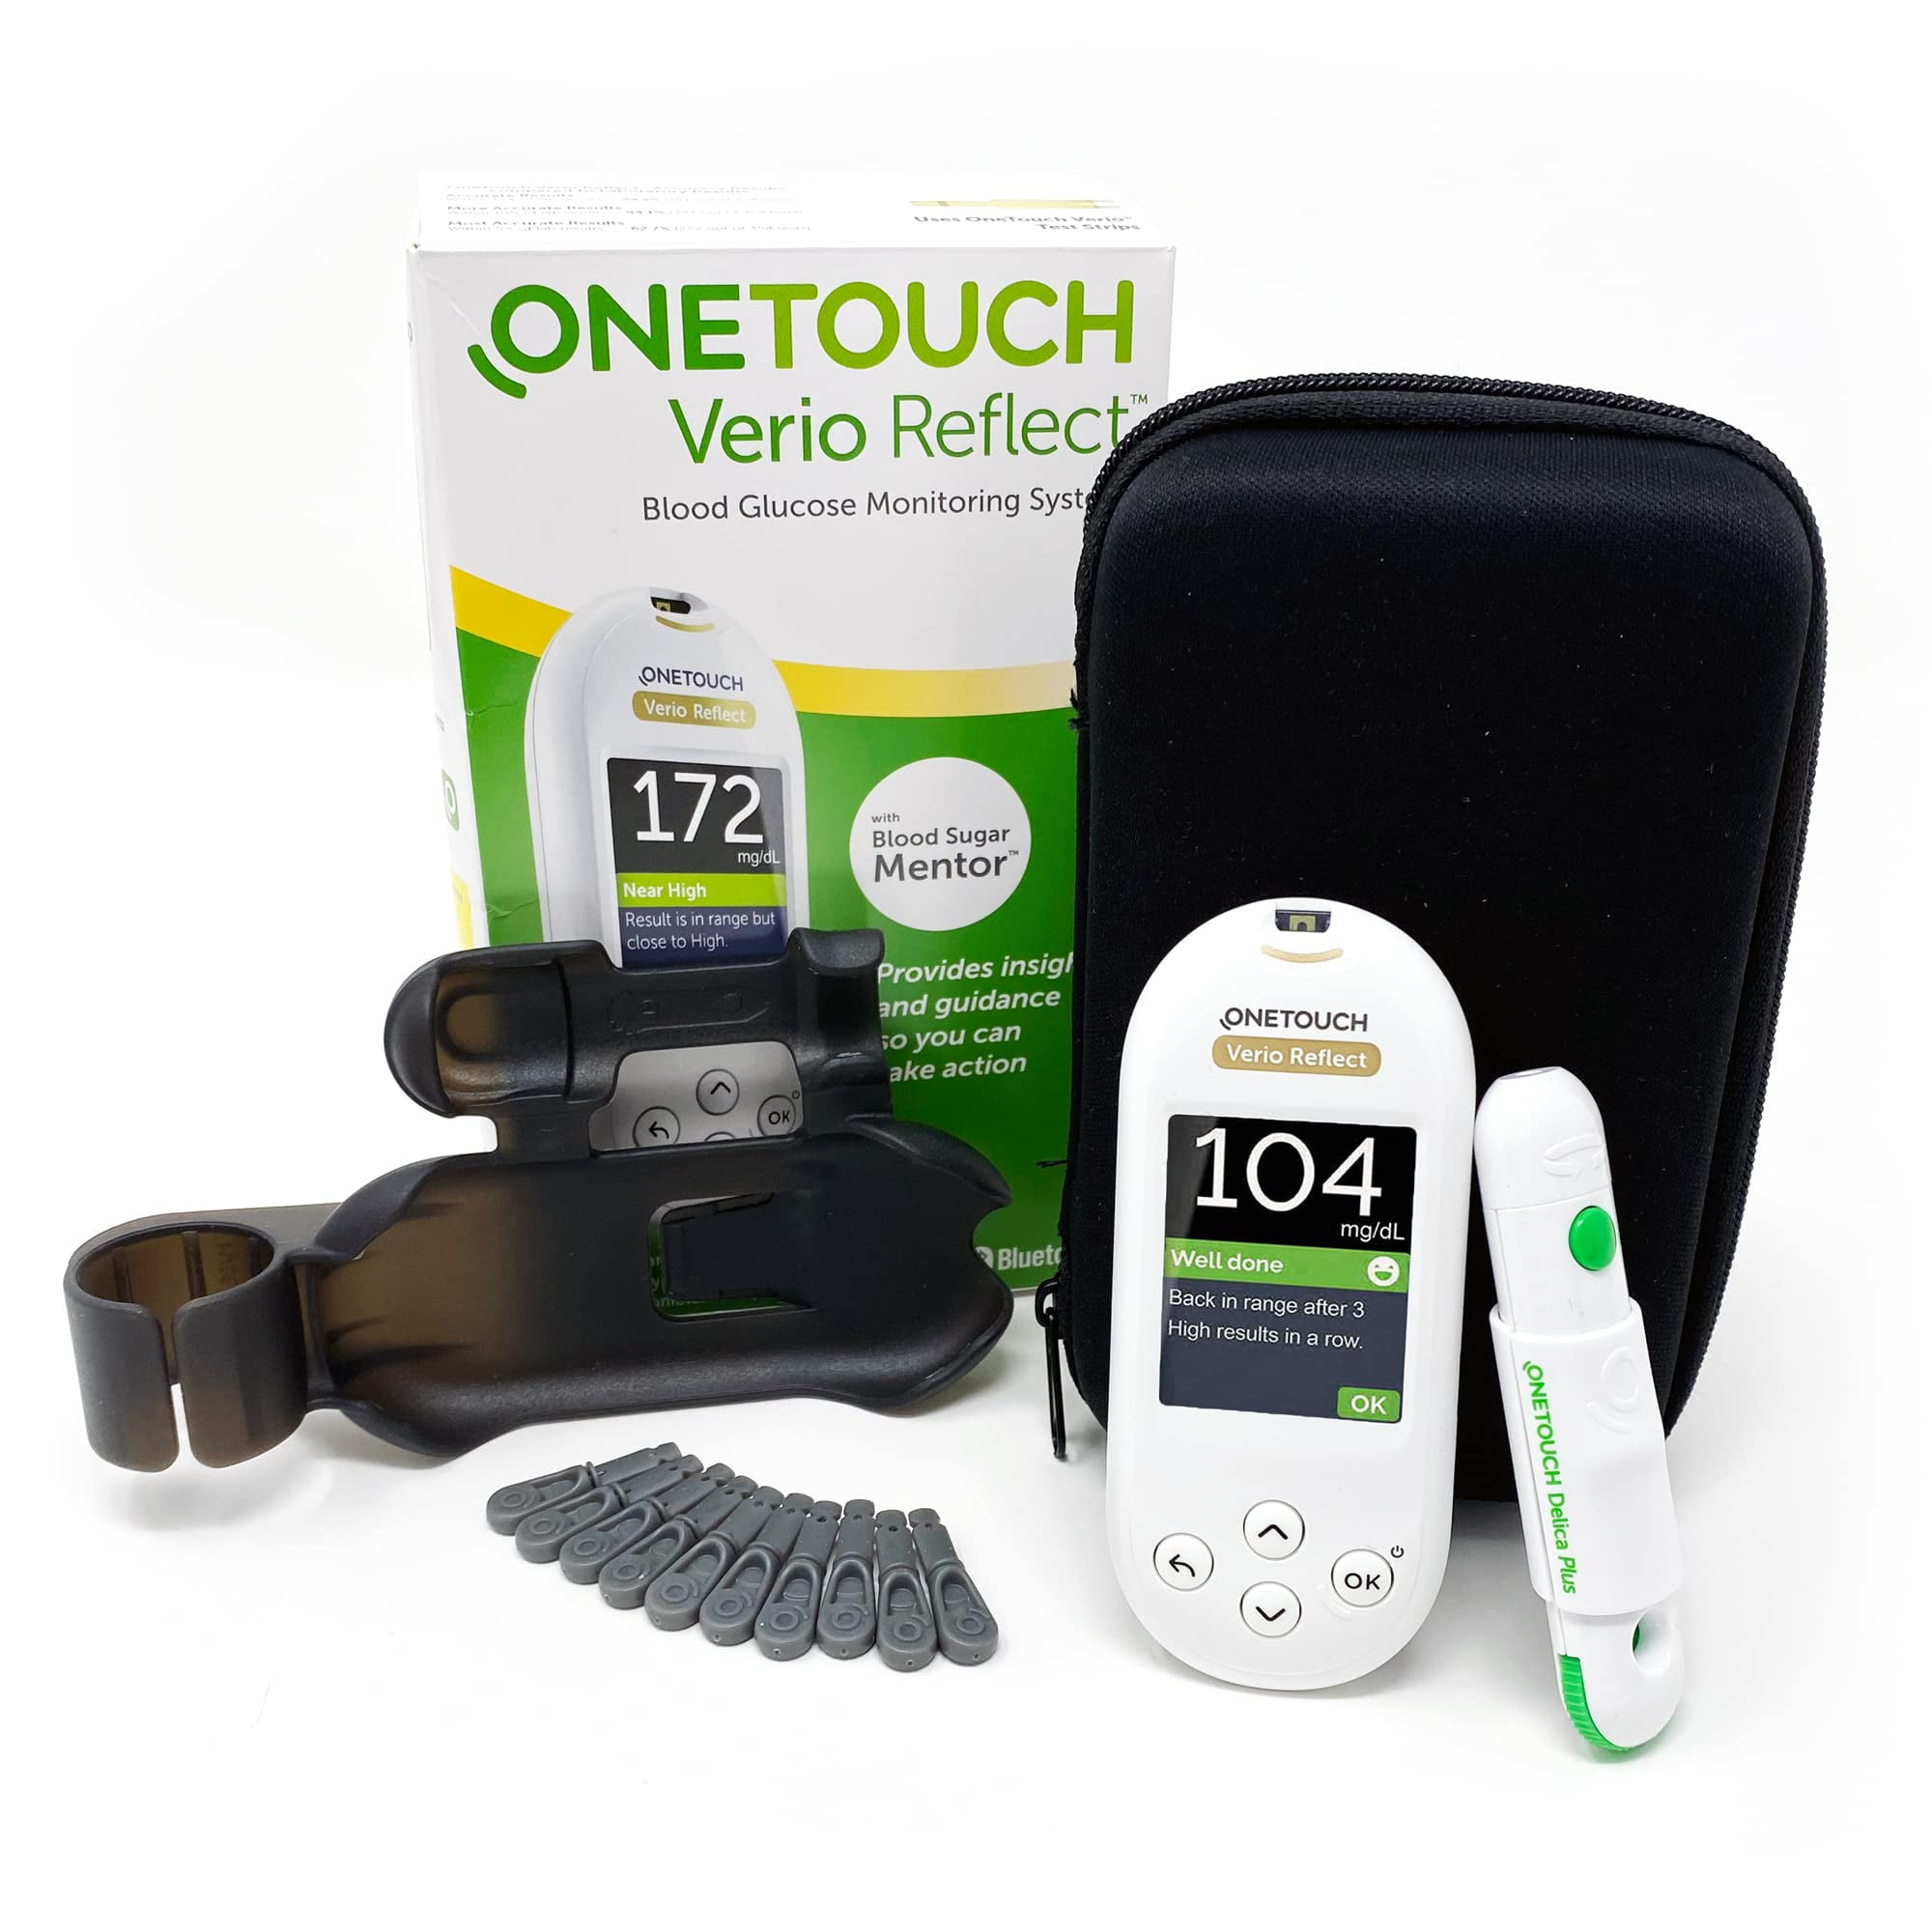 One Touch Verio Test Strips 50ct